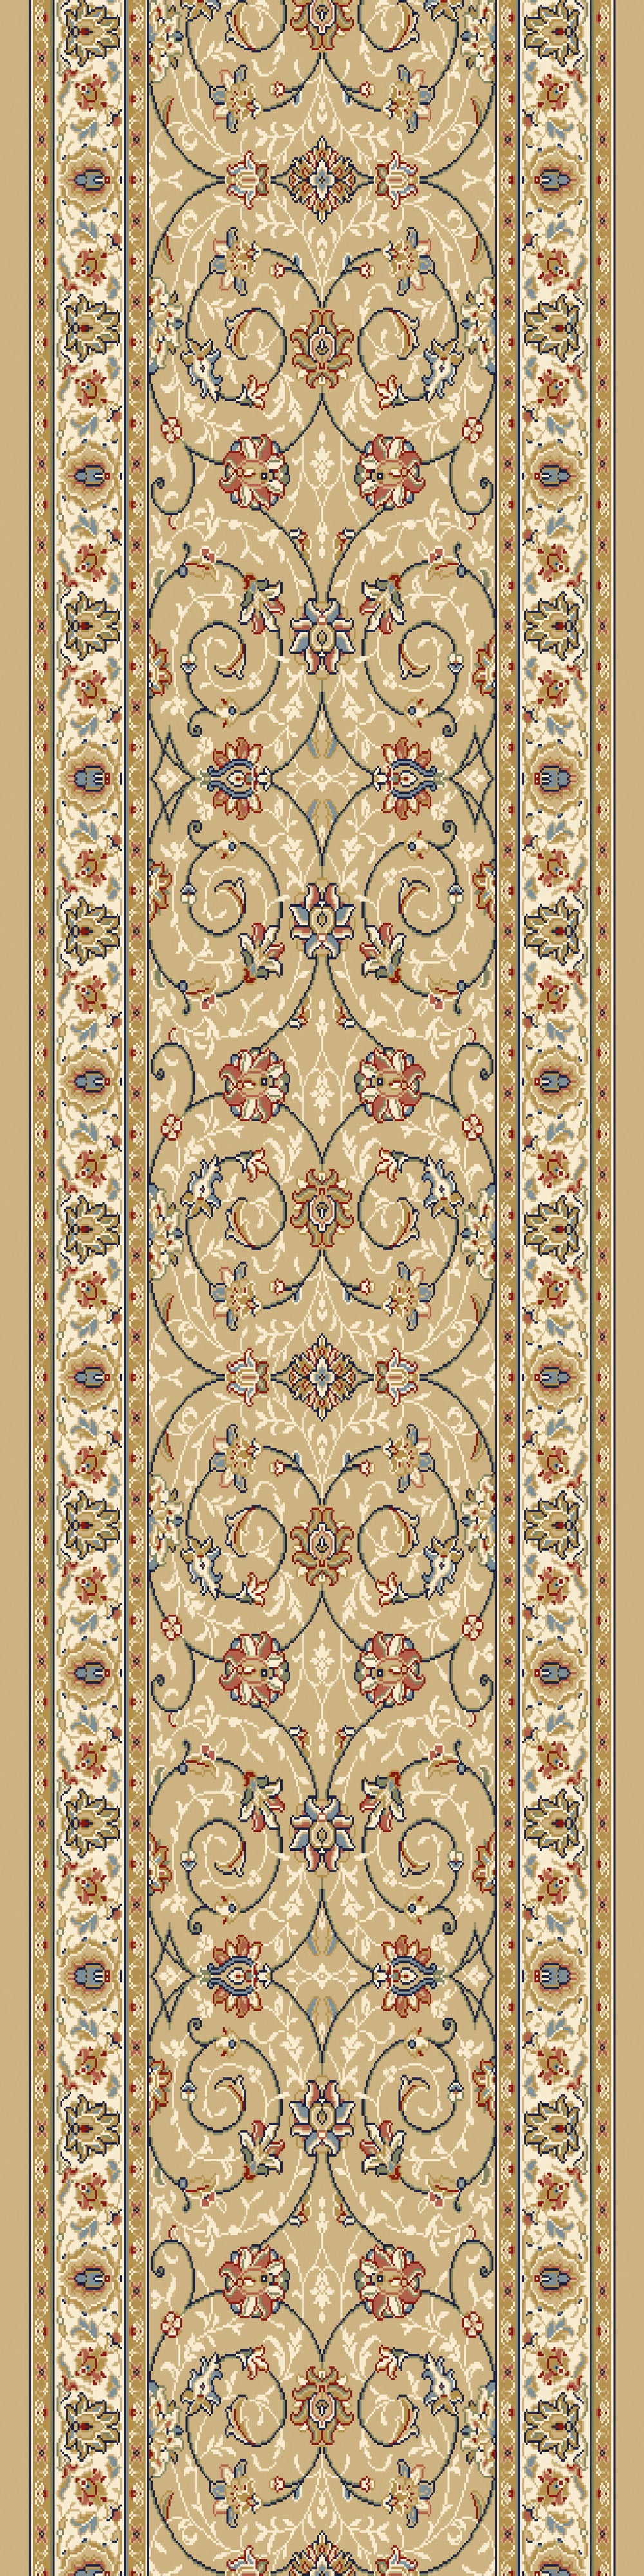 Dynamic Rugs Ancient Garden 57120 Light Gold/Ivory